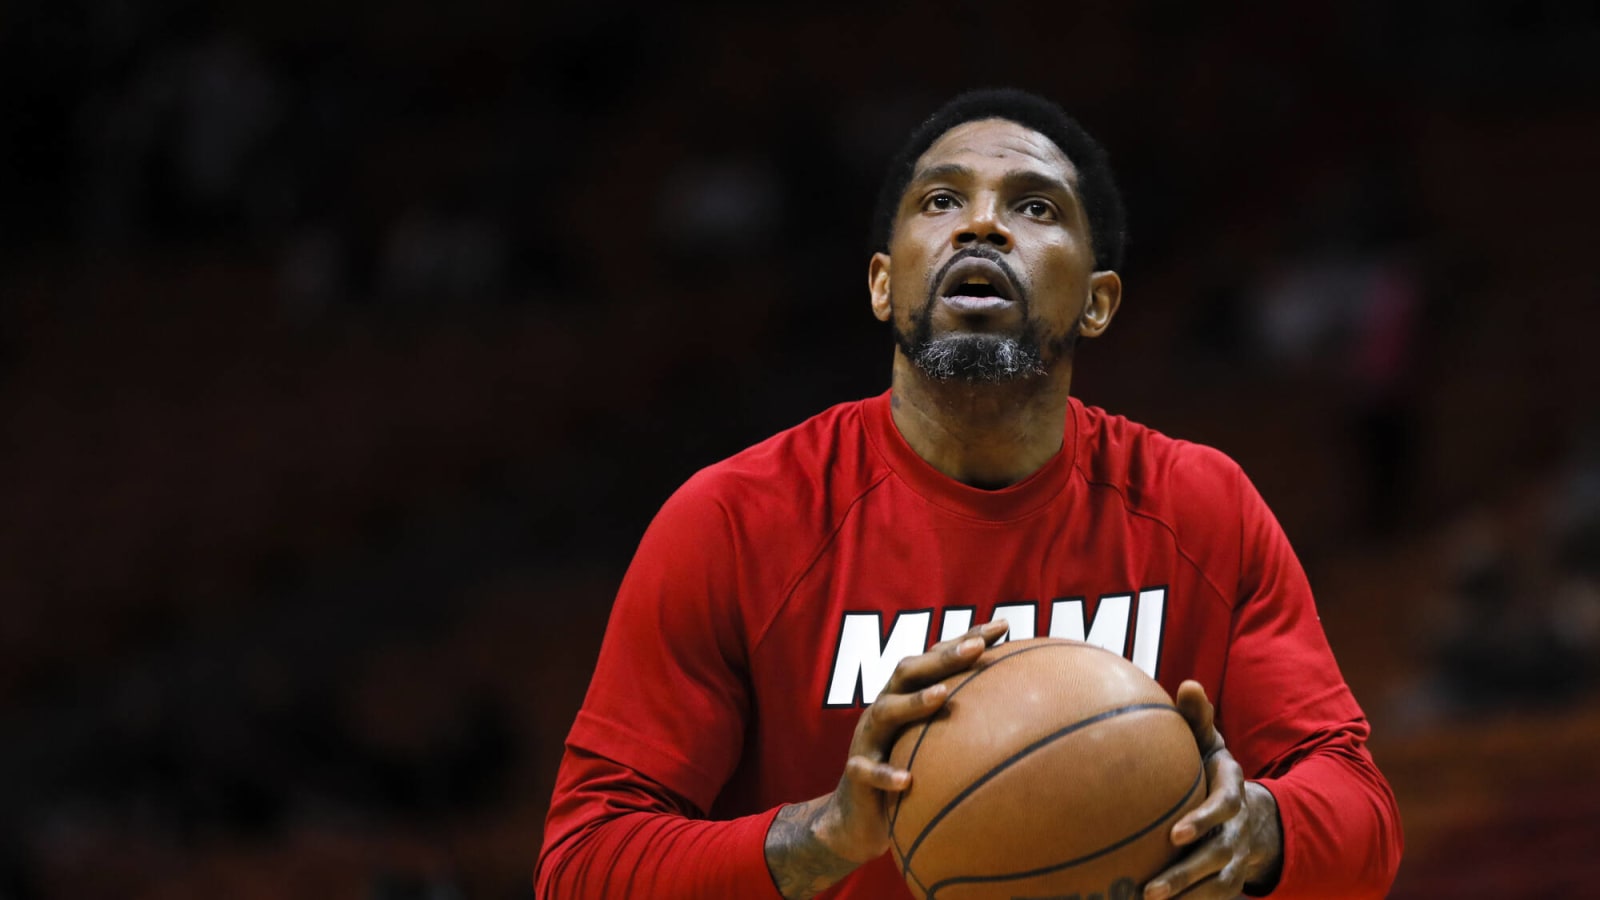 Udonis Haslem returning for his 20th NBA season